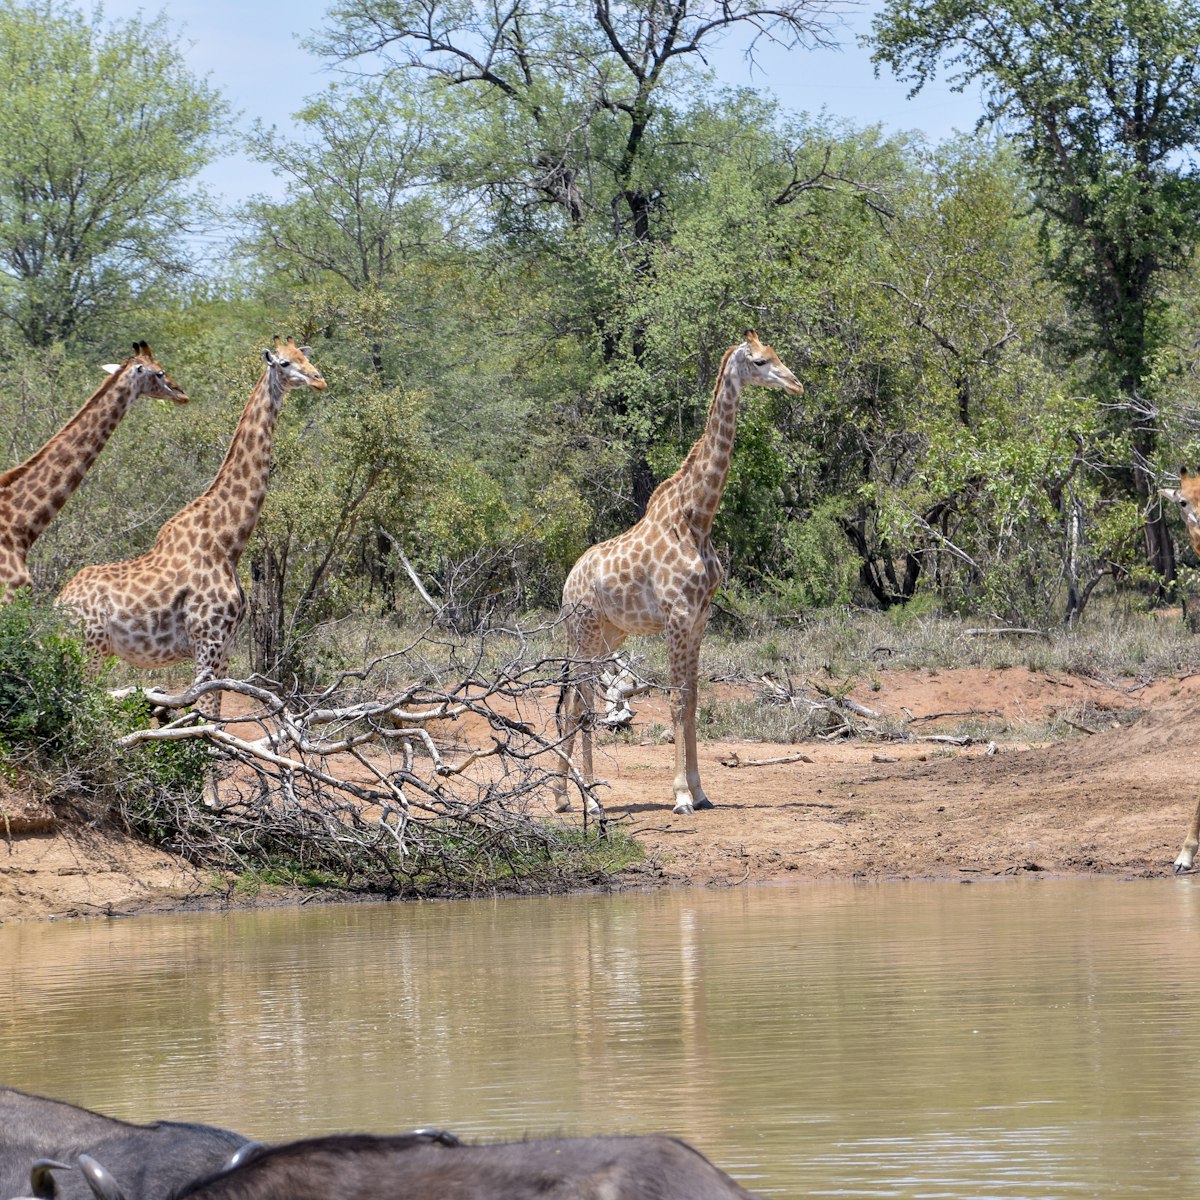 Giraffes in Kapama Private Game Reserve near Kruger National Park, South Africa.